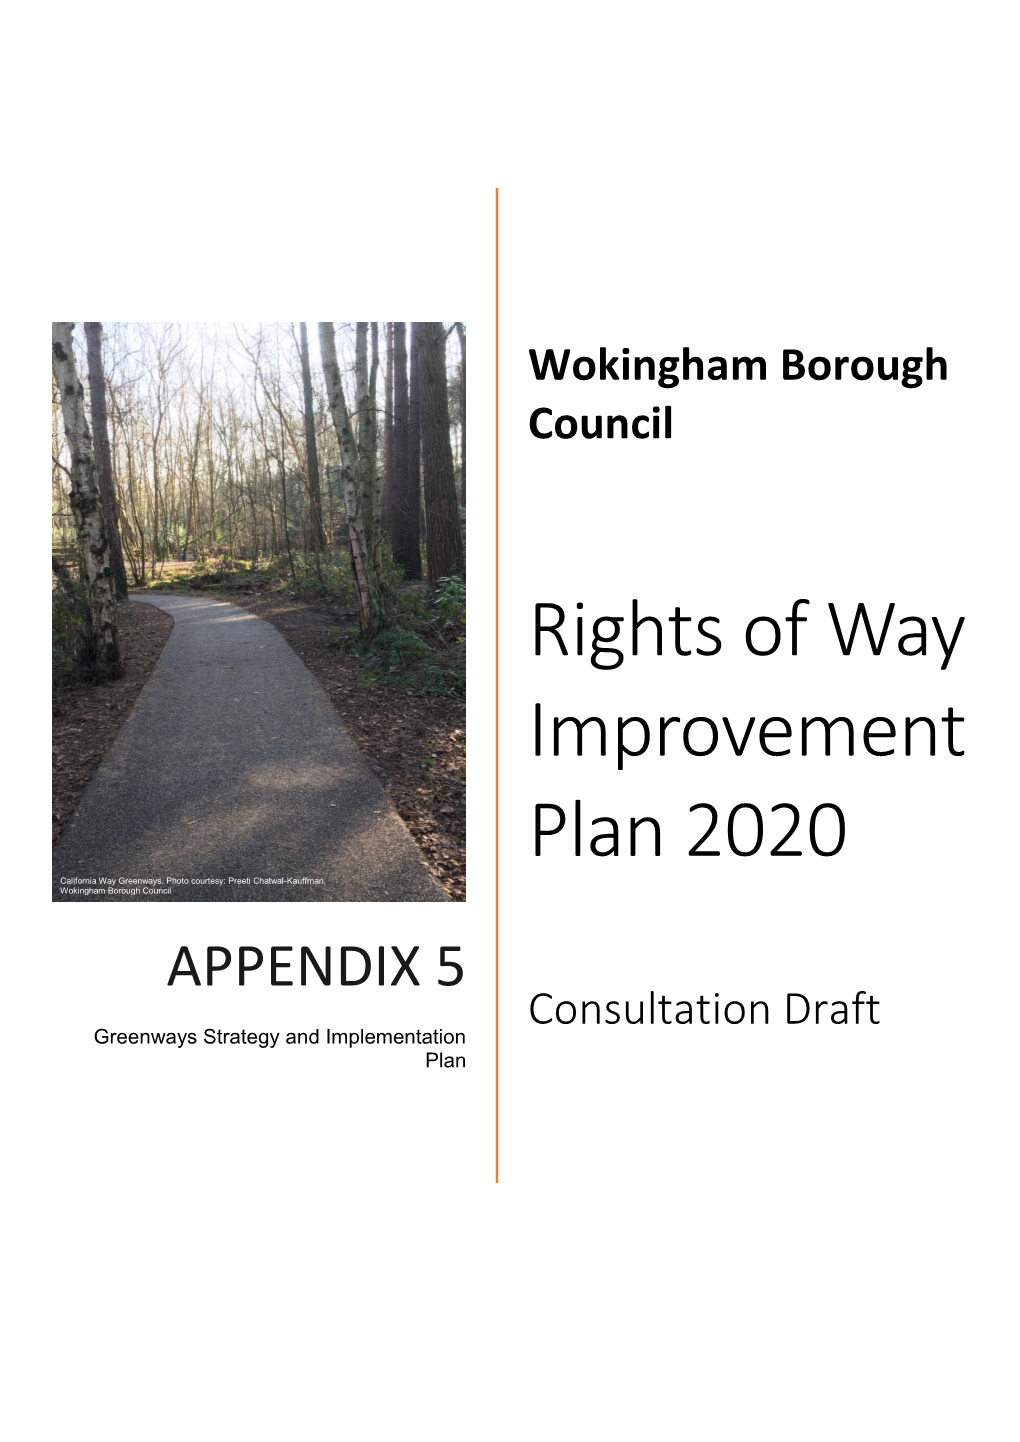 ROWIP Appendix 5: Greenways Strategy and Implementation Plan